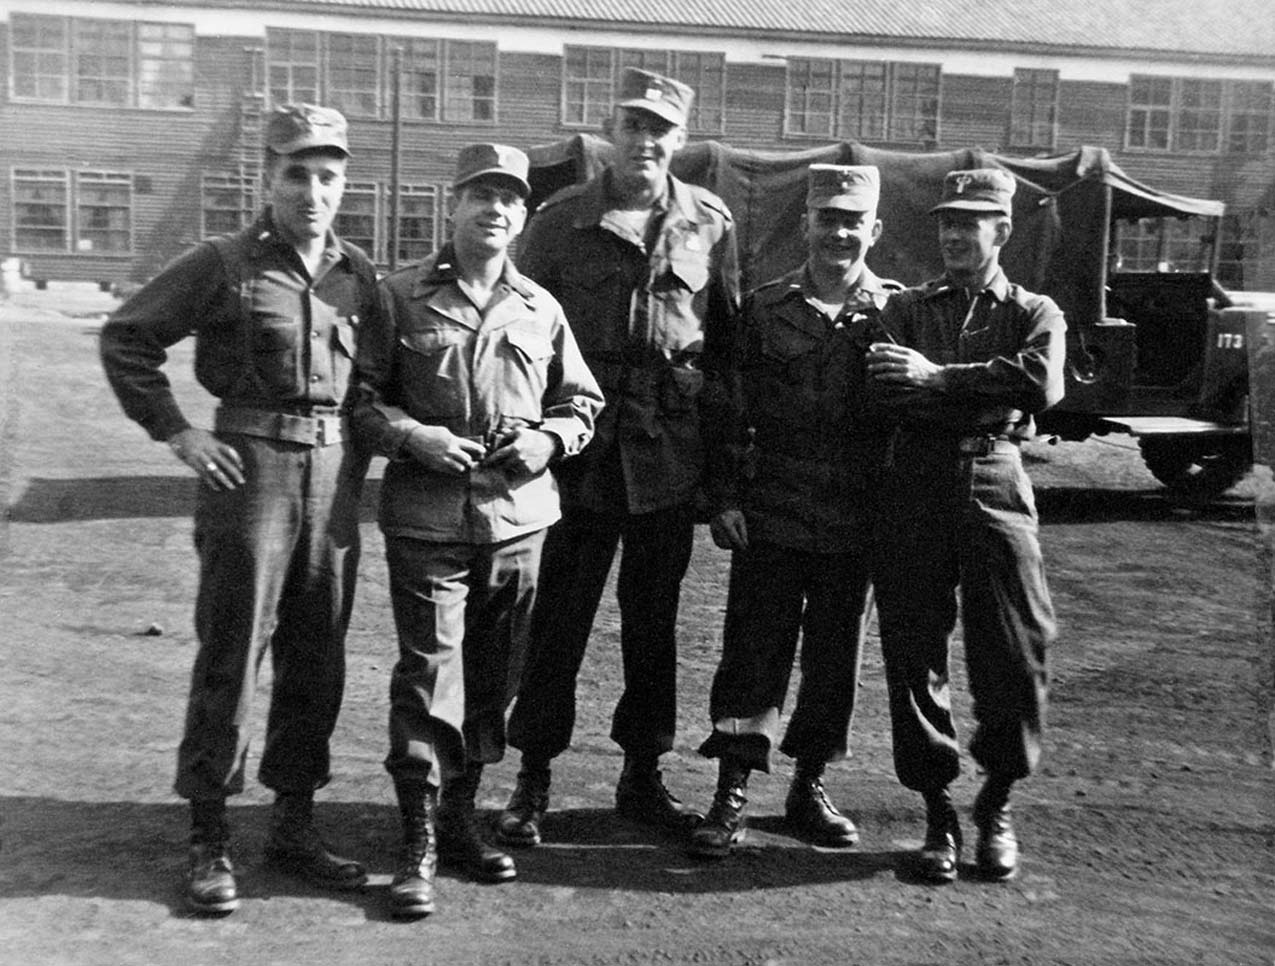 Above, 8007th personnel, left to right, 1LT Sam C. Sarkesian, 1LT Warren E. Parker, CPT Francis W. Dawson, 2LT Earl L. Thieme and 1LT Leo F. Siefert at Camp Drake, Japan. The men are graduates of Class #3 of the Special Forces Course. (U.S. Army)